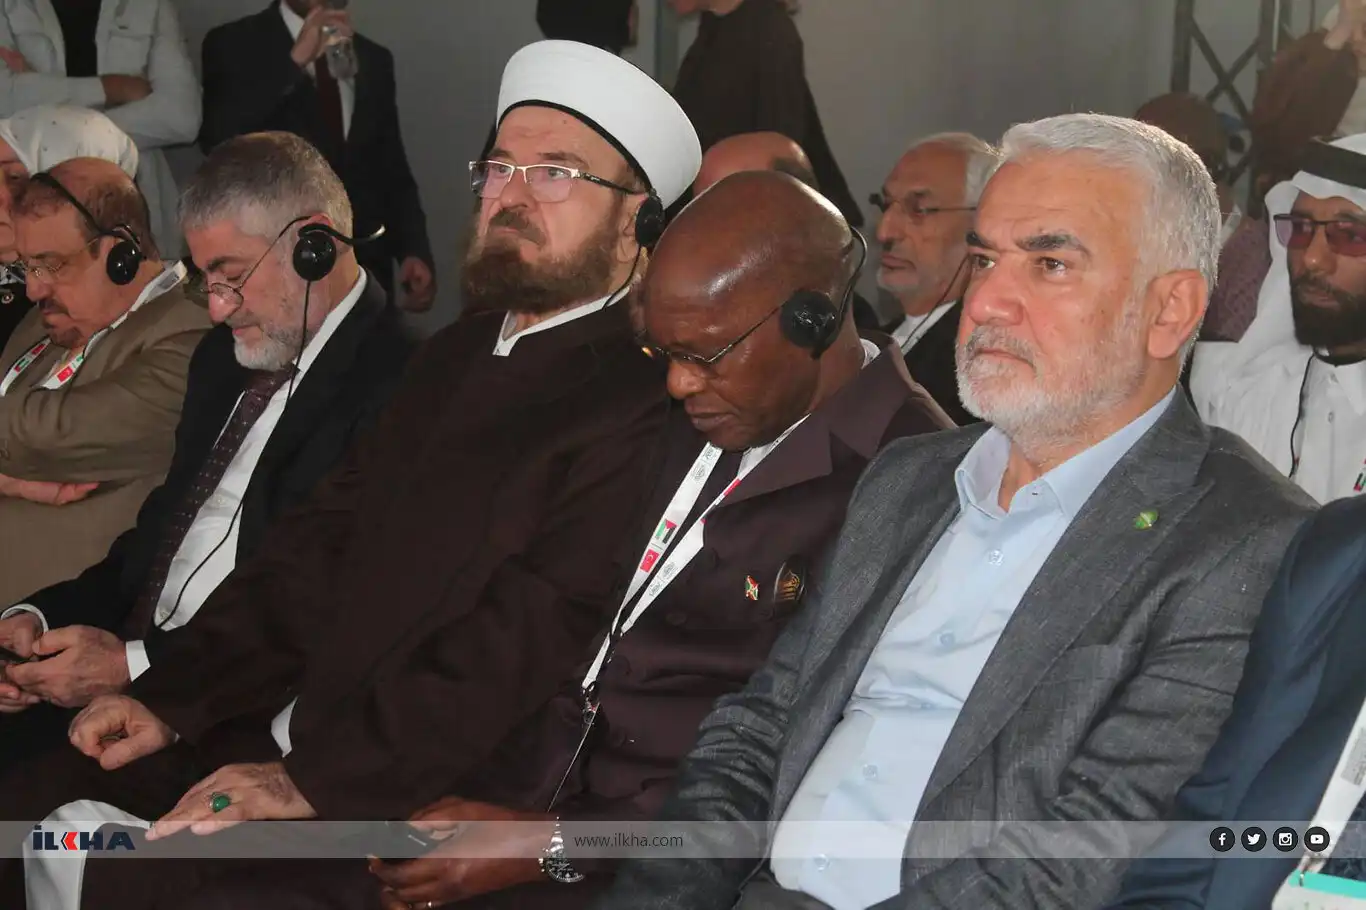 5th Conference of the Inter-Parliamentary Al-Quds Platform enters day 2 in Istanbul